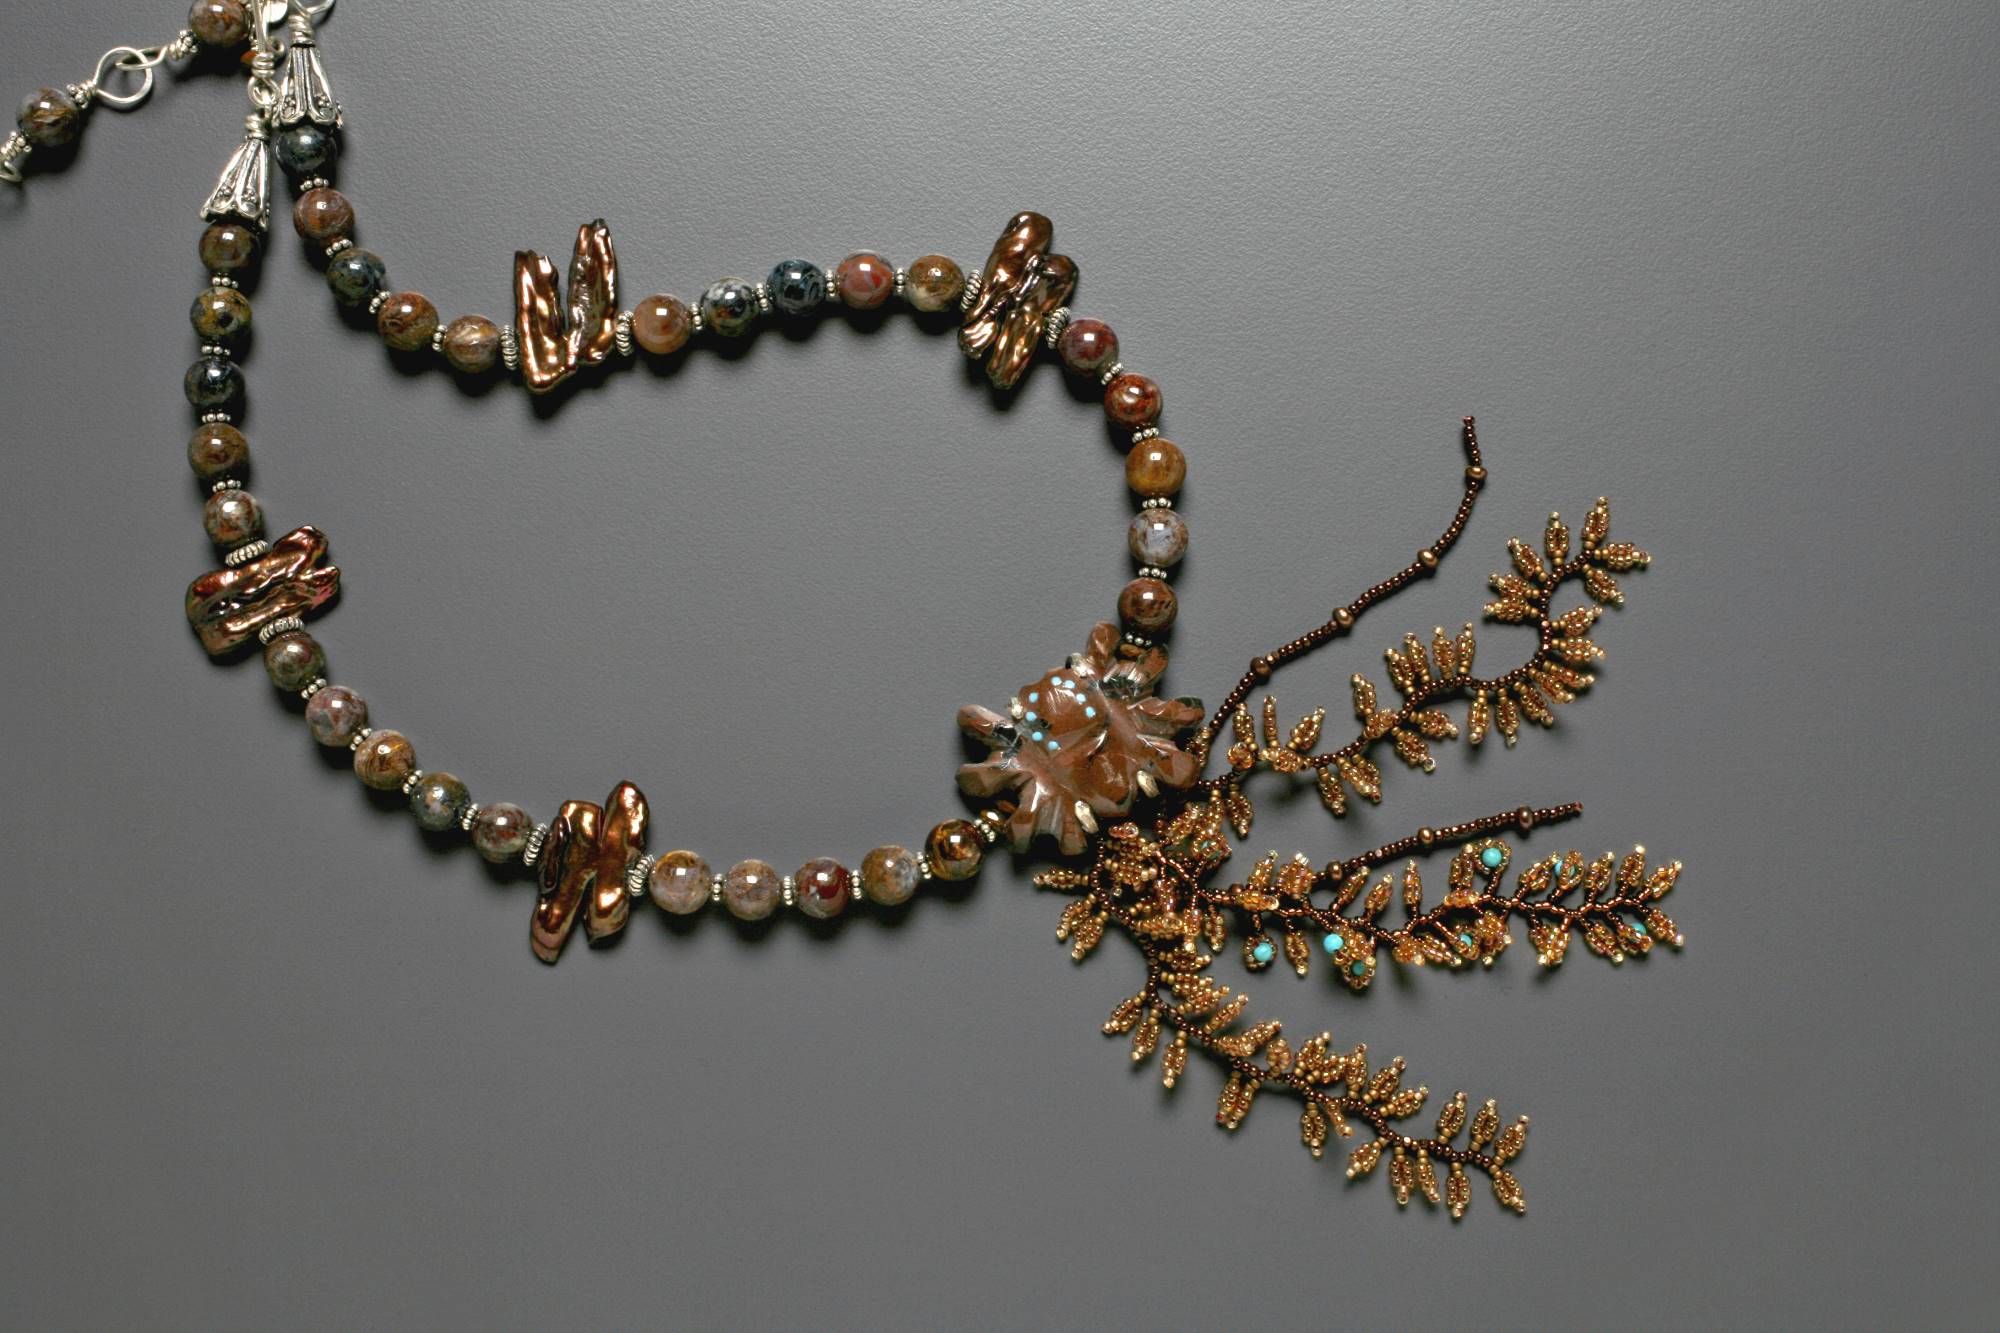 Detail of Brown Haired Girl Necklace